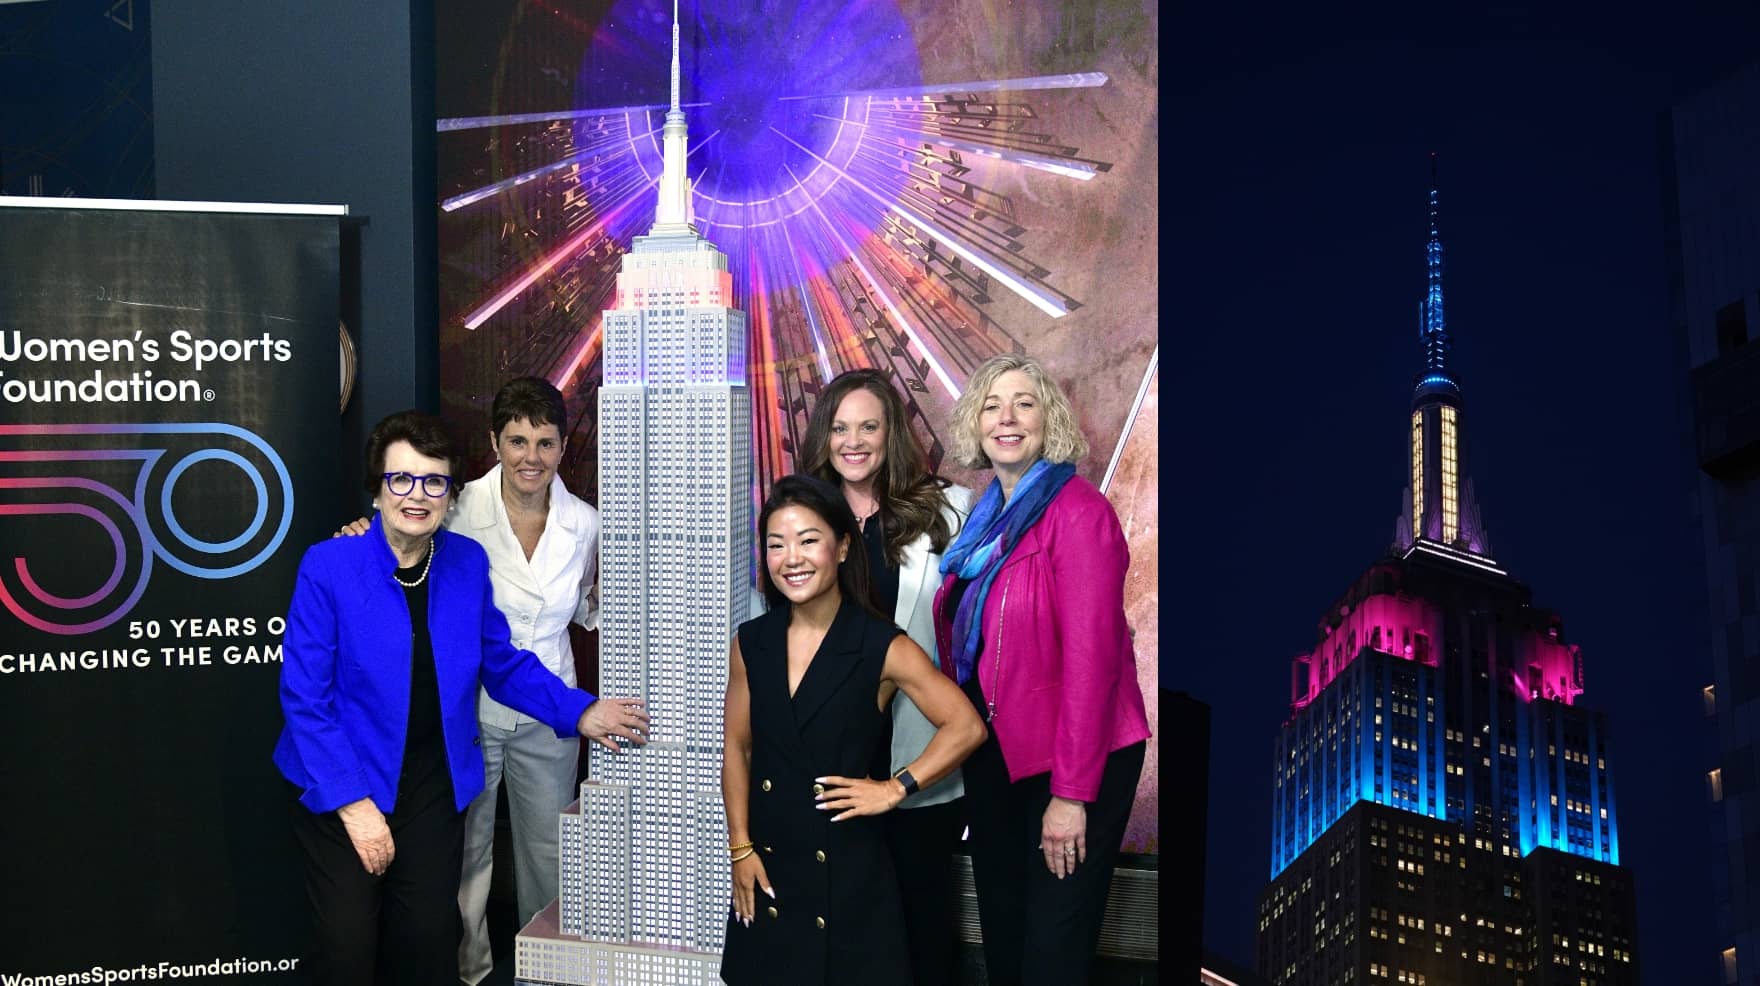 [L-R] WSF Founder Billie Jean King, WSF Past Board Chair Ilana Kloss, WSF President Scout Basset, WSF CEO Danette Leighton and WSF Board Chair Robin Harris pose next to a model of the Empire State Building lit up in WSF's brand colors to celebrate WSF's 50th anniversary year. [Credit Empire State Realty Trust] The Empire State Building lit up at night in WSF brand colors. [Credit: Bryan Smith]